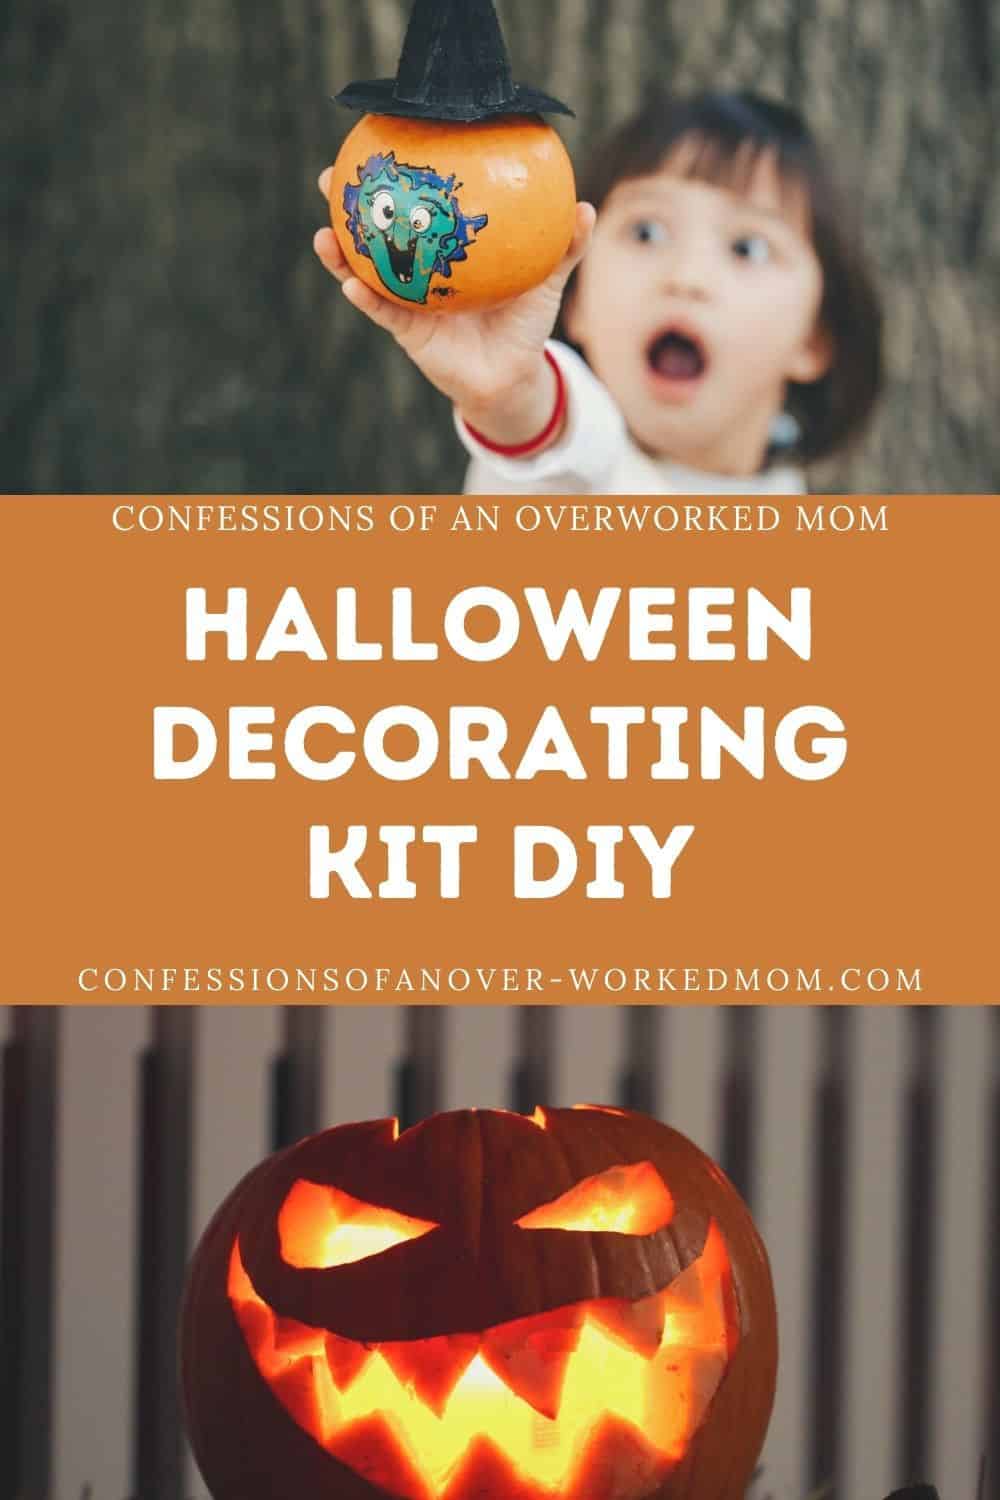 If you're like me, you probably go to the store each year and buy a Halloween pumpkin carving decorating kit. Check out these tips to make your own pumpkin decorating kit.